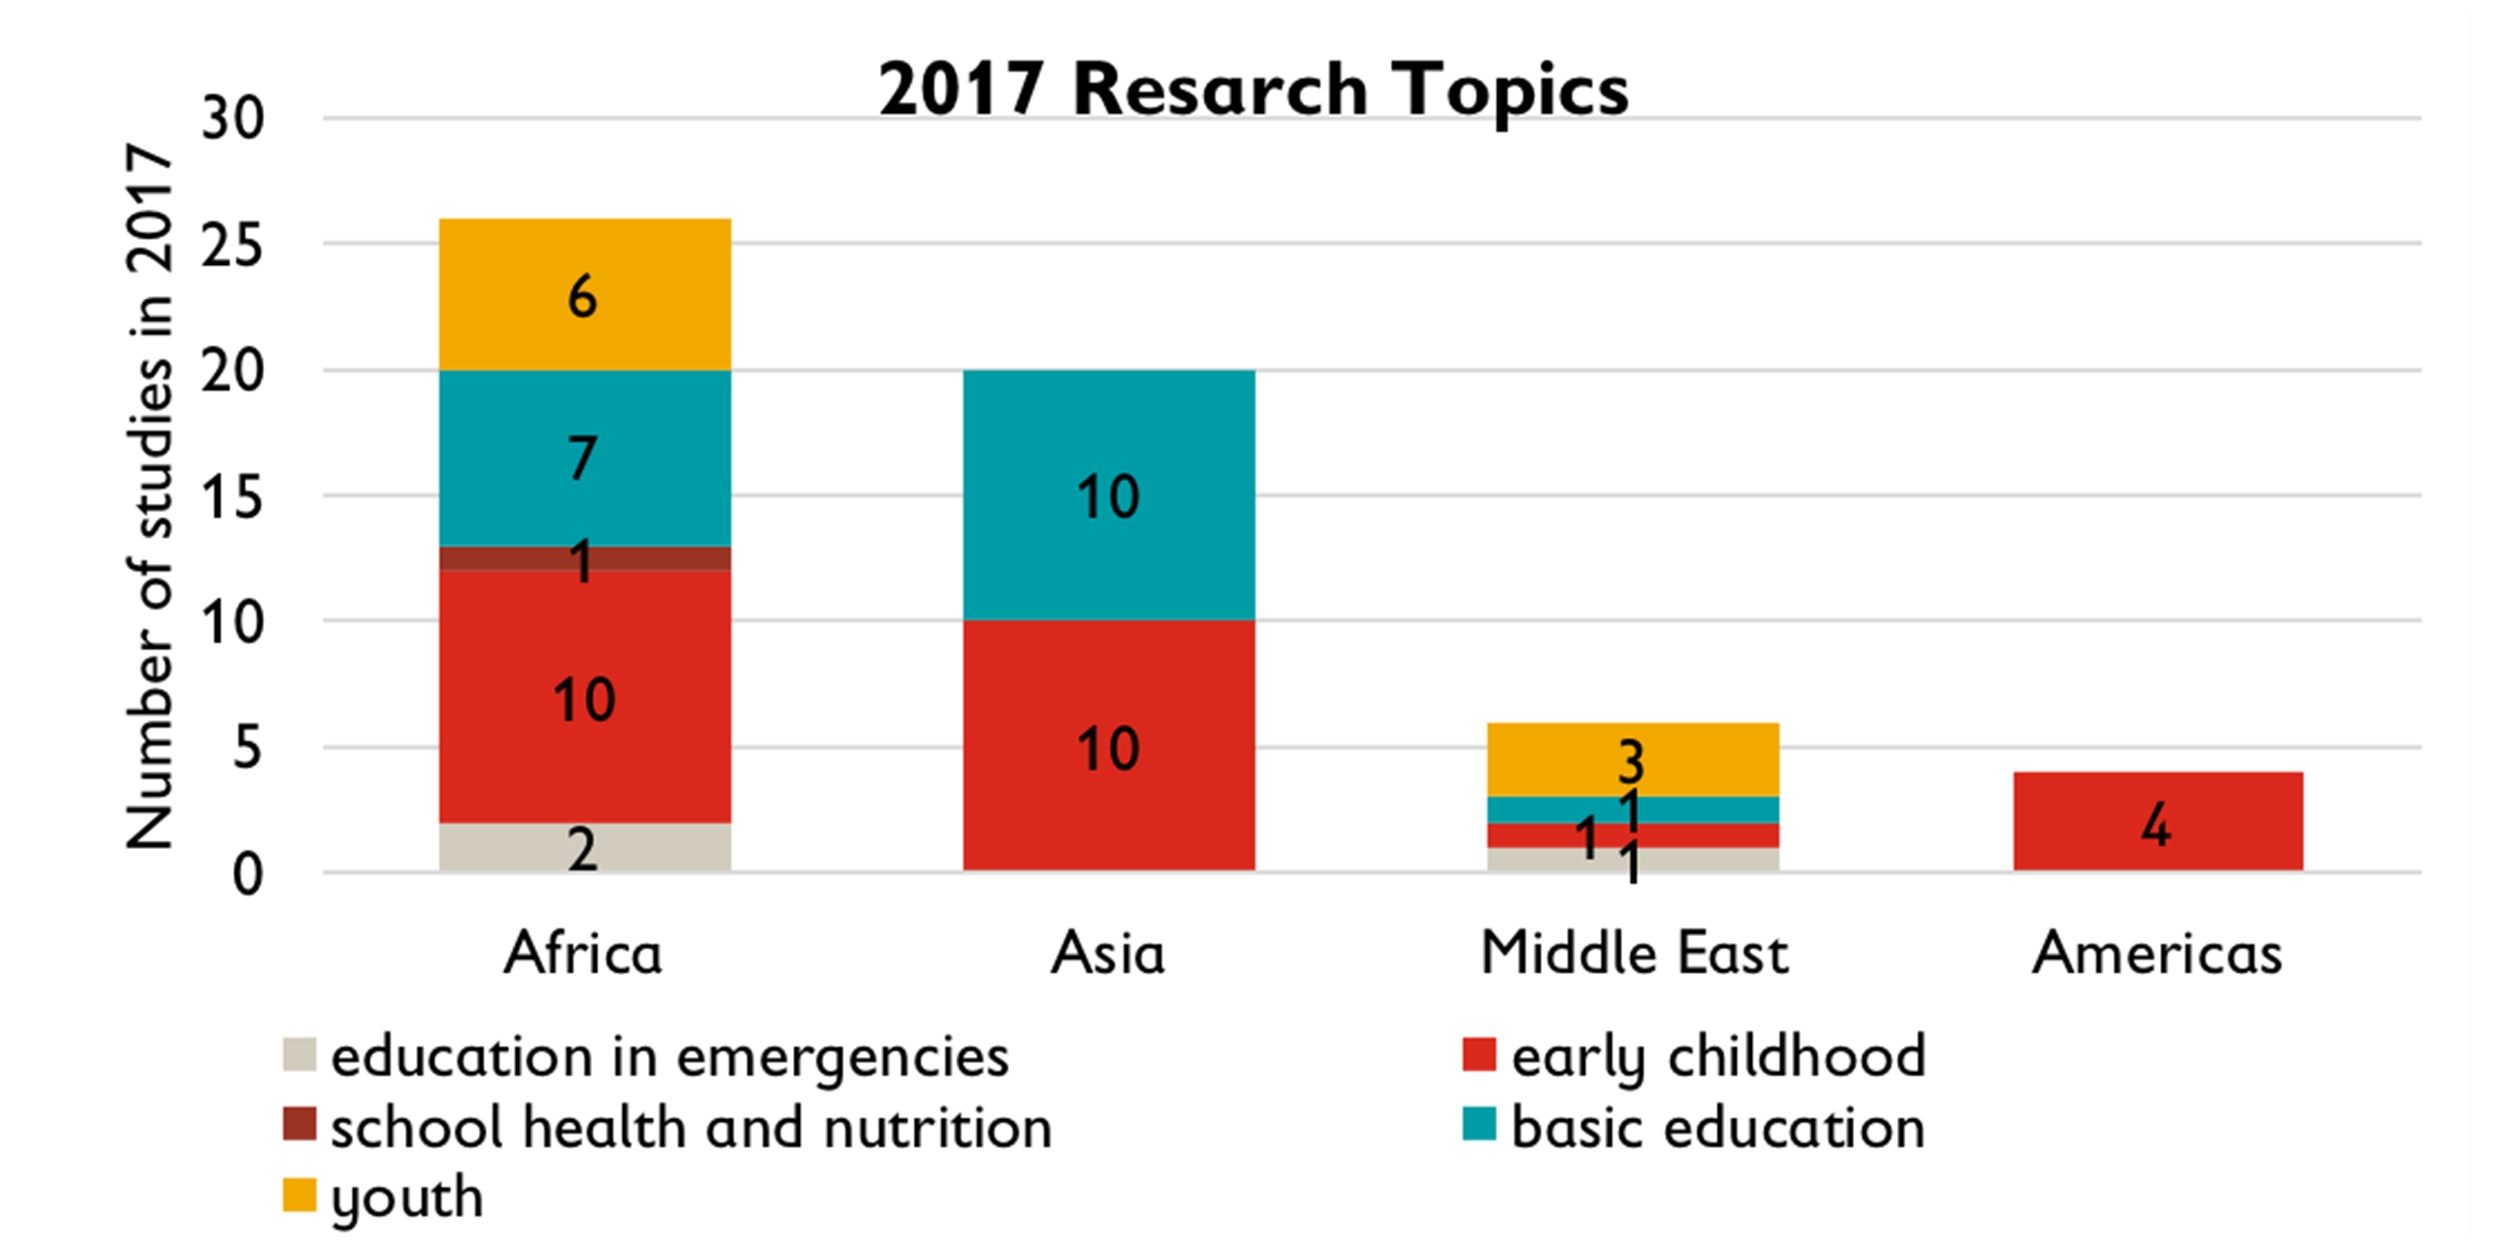 This bar graph indicates the number of research topics in 2017, sorted by country/region. The first bar indicates that there will be 26 studies in Africa, the second indicates there will be 20 in Asia, the third indicates there will be 6 in the Middle East, and the last bar shows 4 studies done in the Americas. Image credit: Save the Children, 2017. 